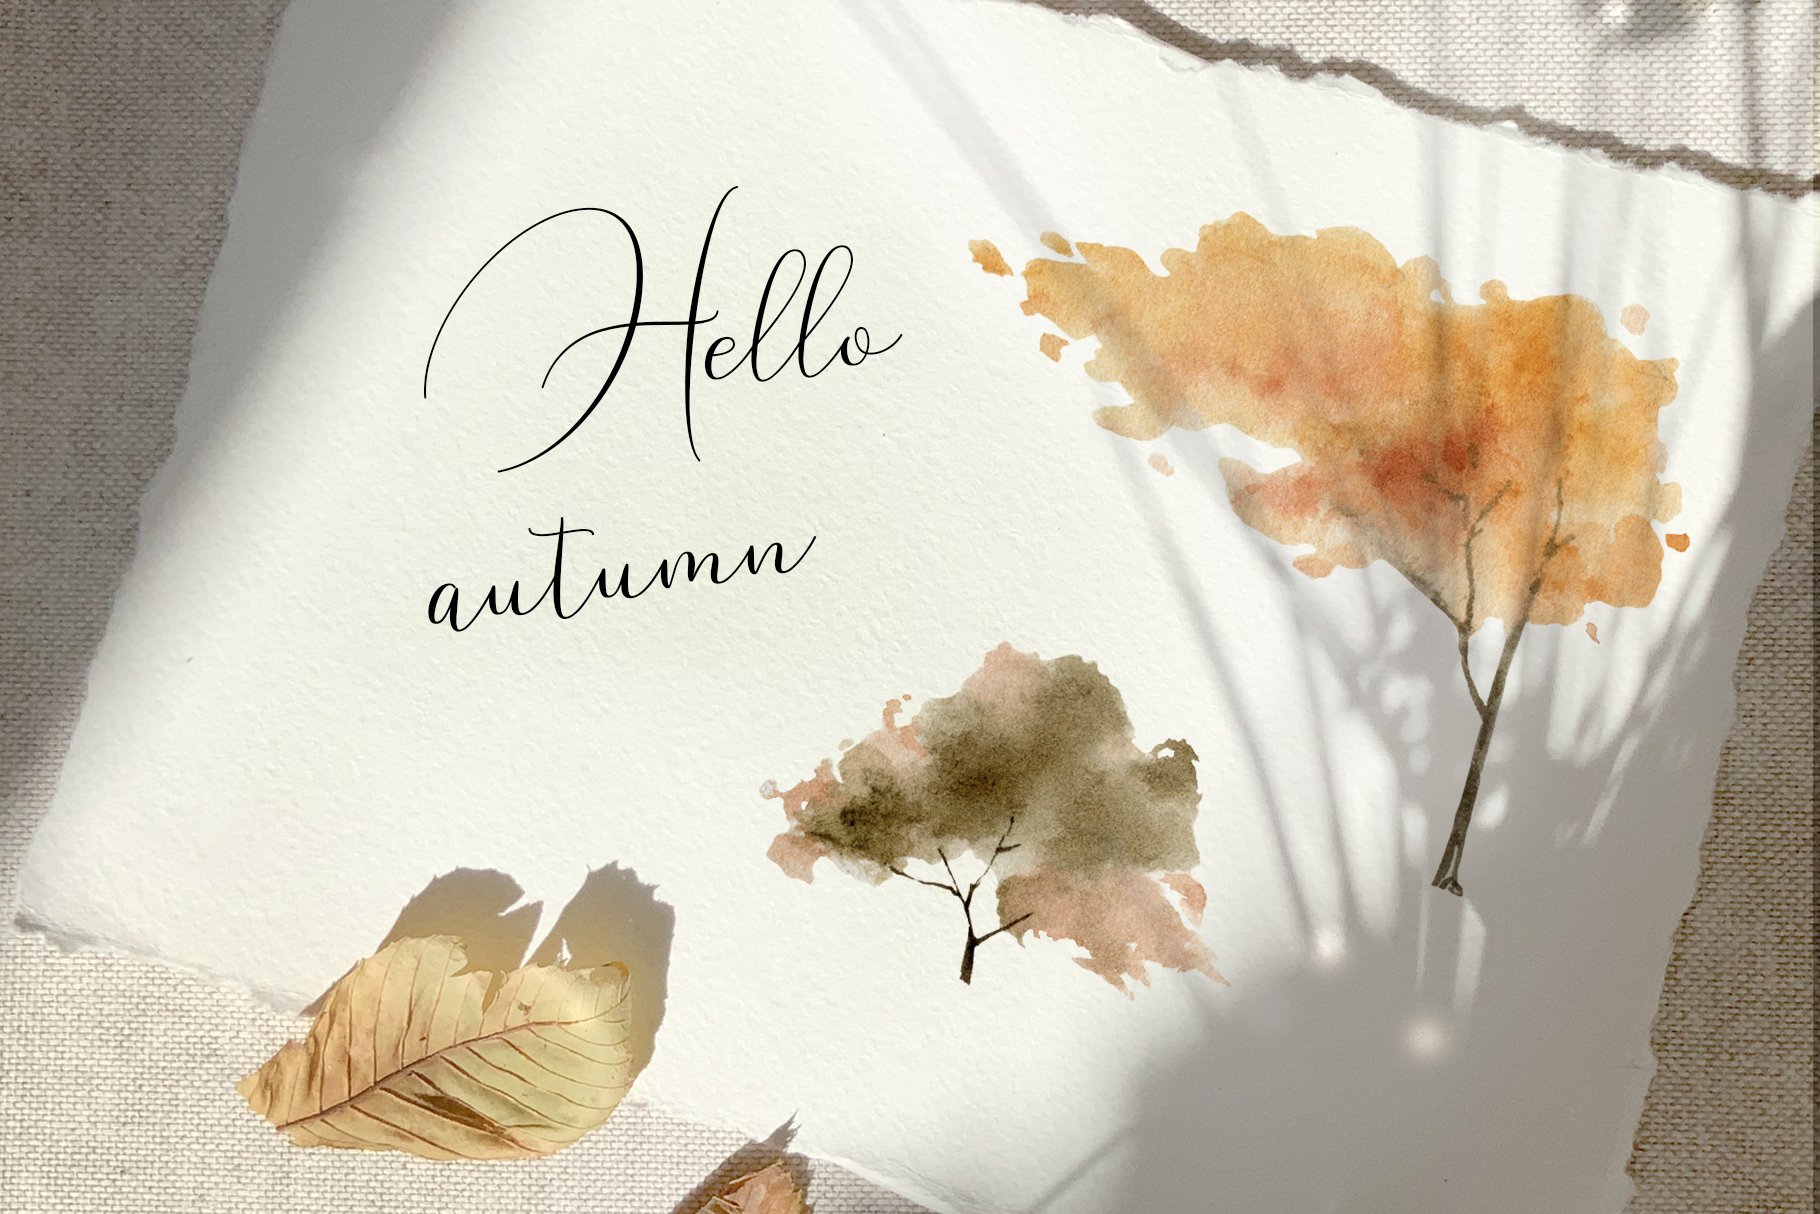 Watercolor painting of autumn leaves and the words hello autumn by Isobelle Ann Dods-Withers.